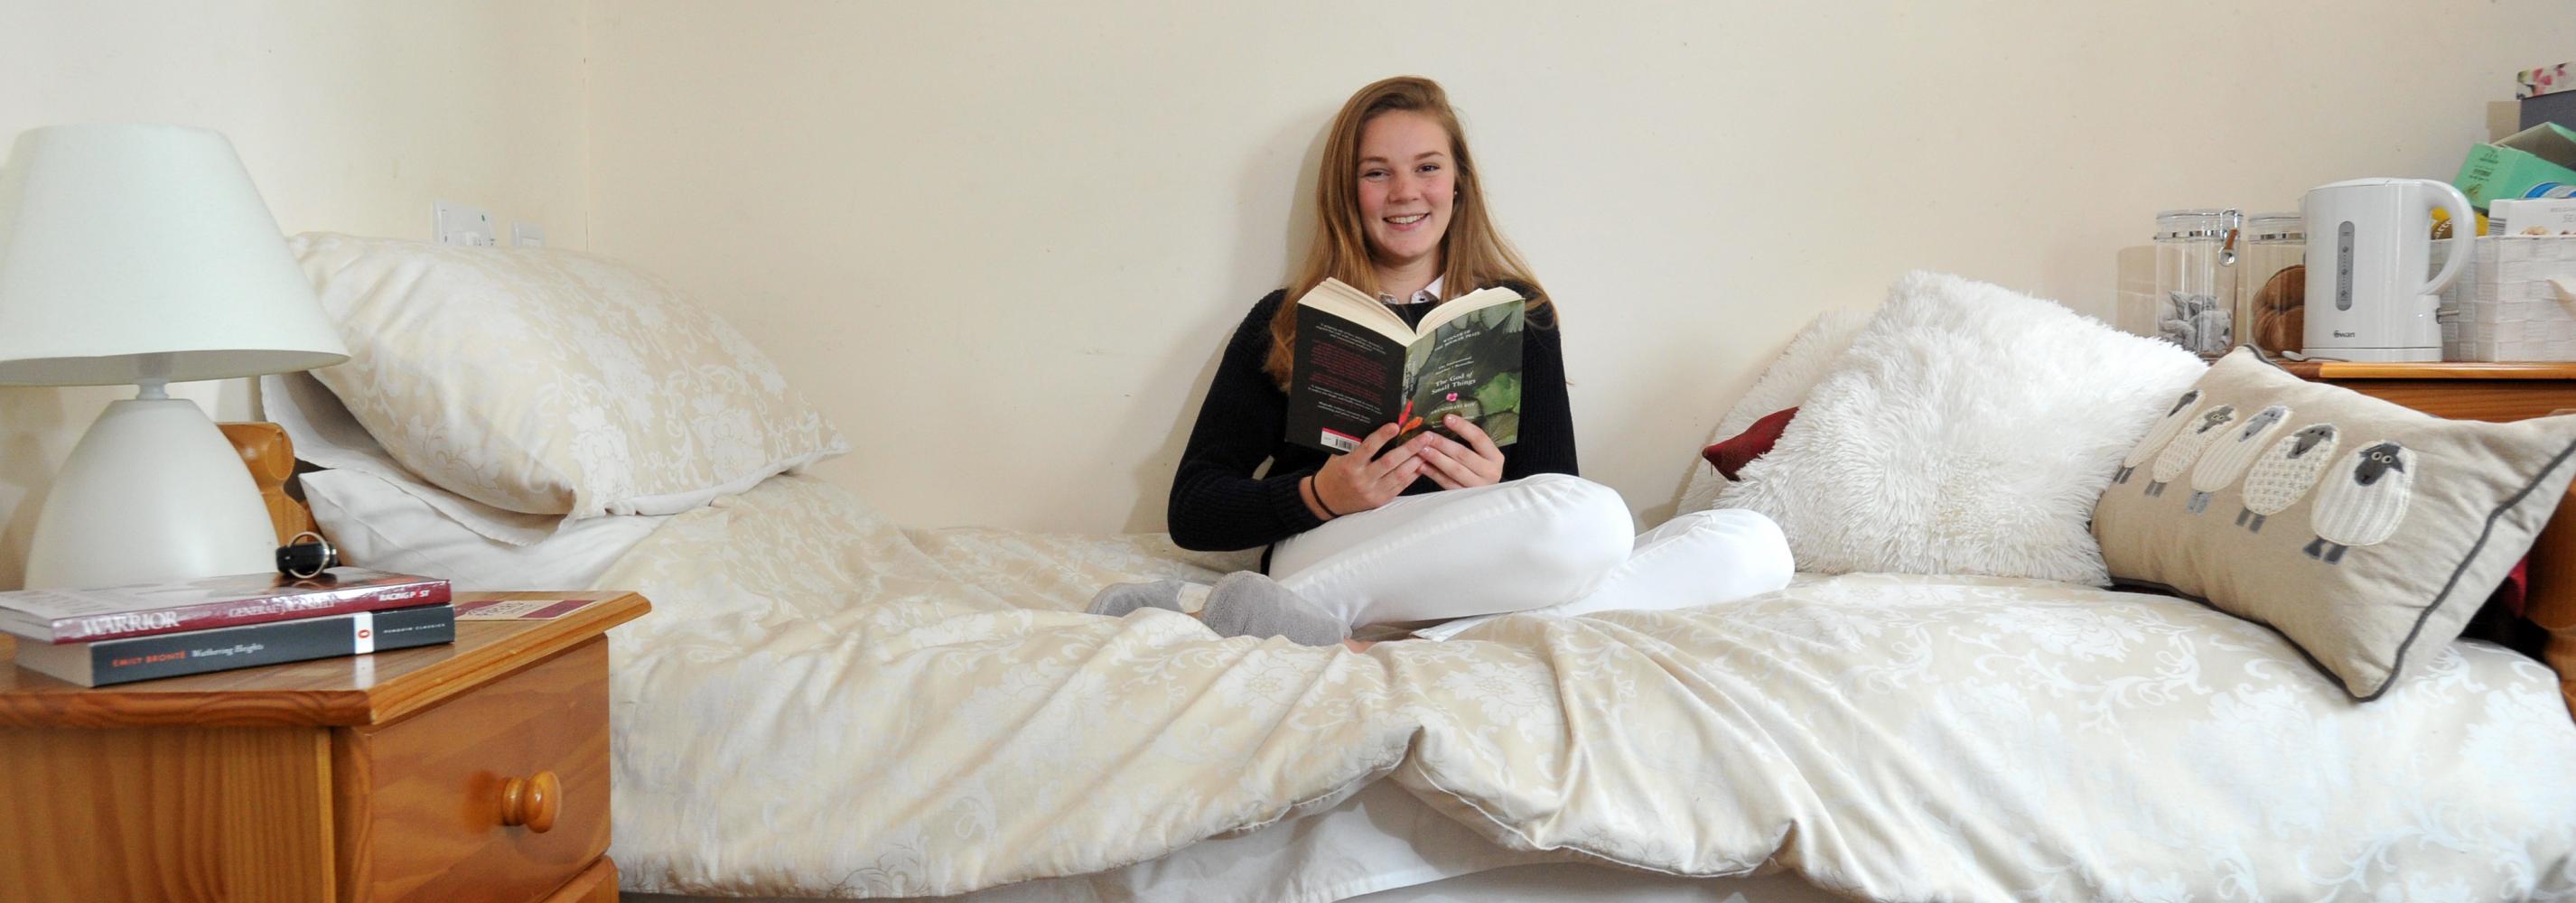 Student sat on bed reading. Room has a bedside table, storage and a noticeboard